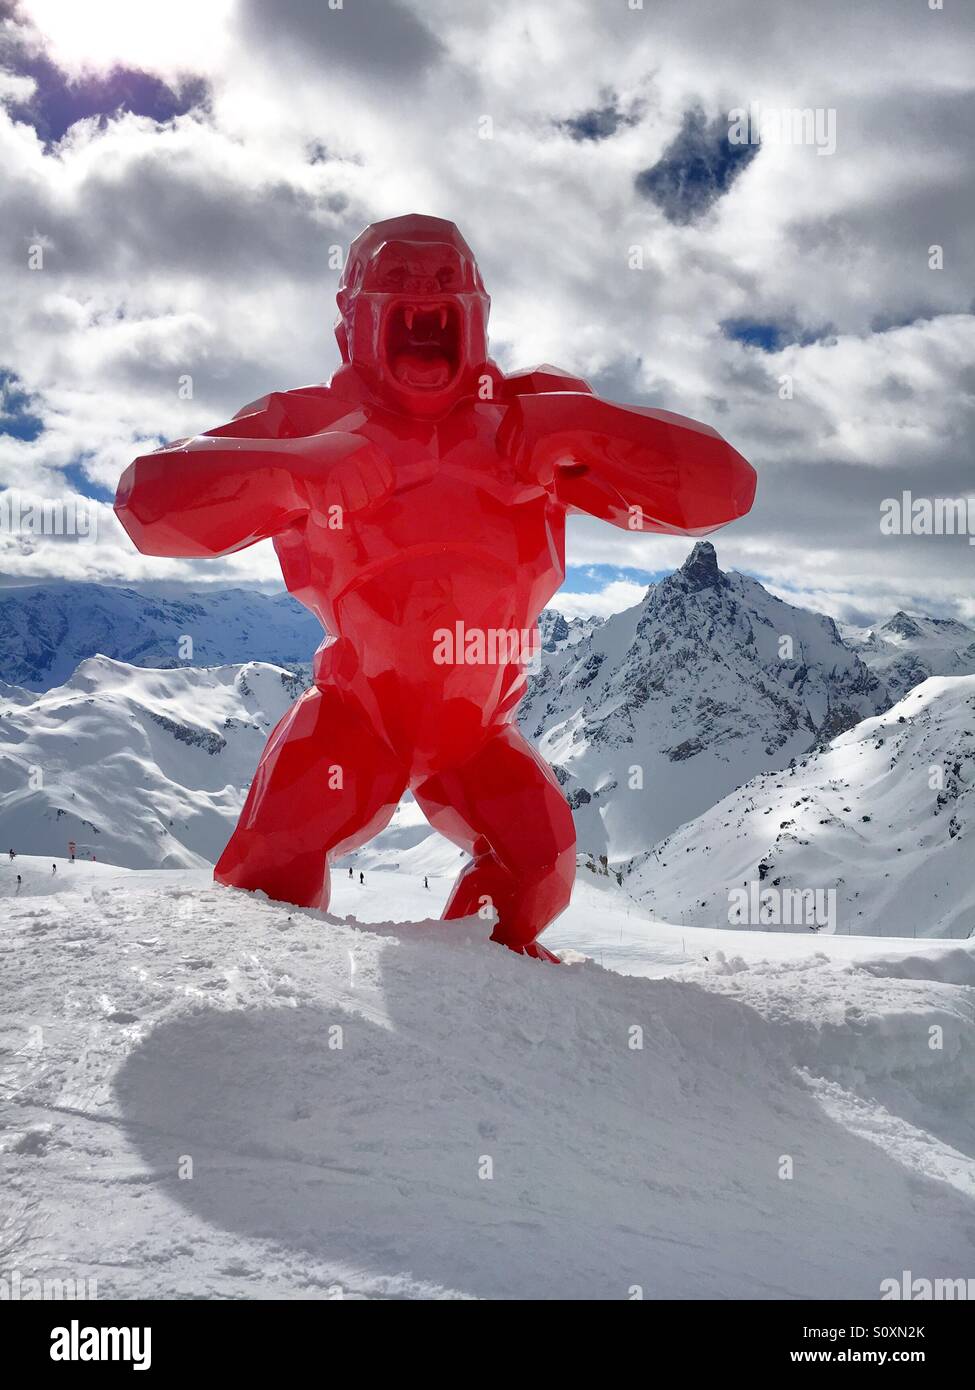 Red King Kong statue towers over mountain at courcheval in the French Alps  Stock Photo - Alamy